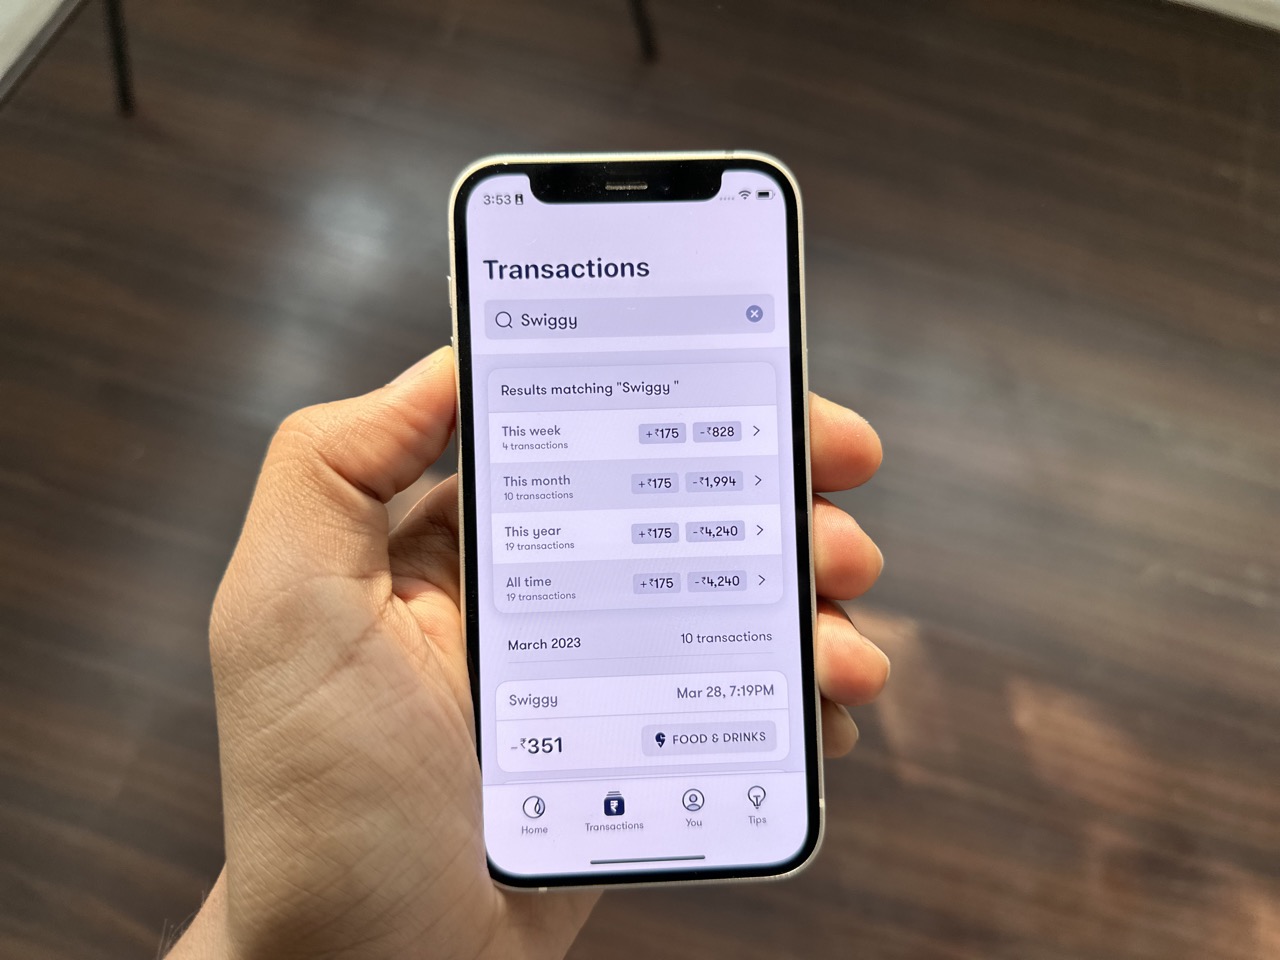 A person holding the iphone with Fold app open. In the app - "swiggy" is in transaction search field and in results there is a summary which shows transactions in  this week, this month, this year, and all time with amounts. 